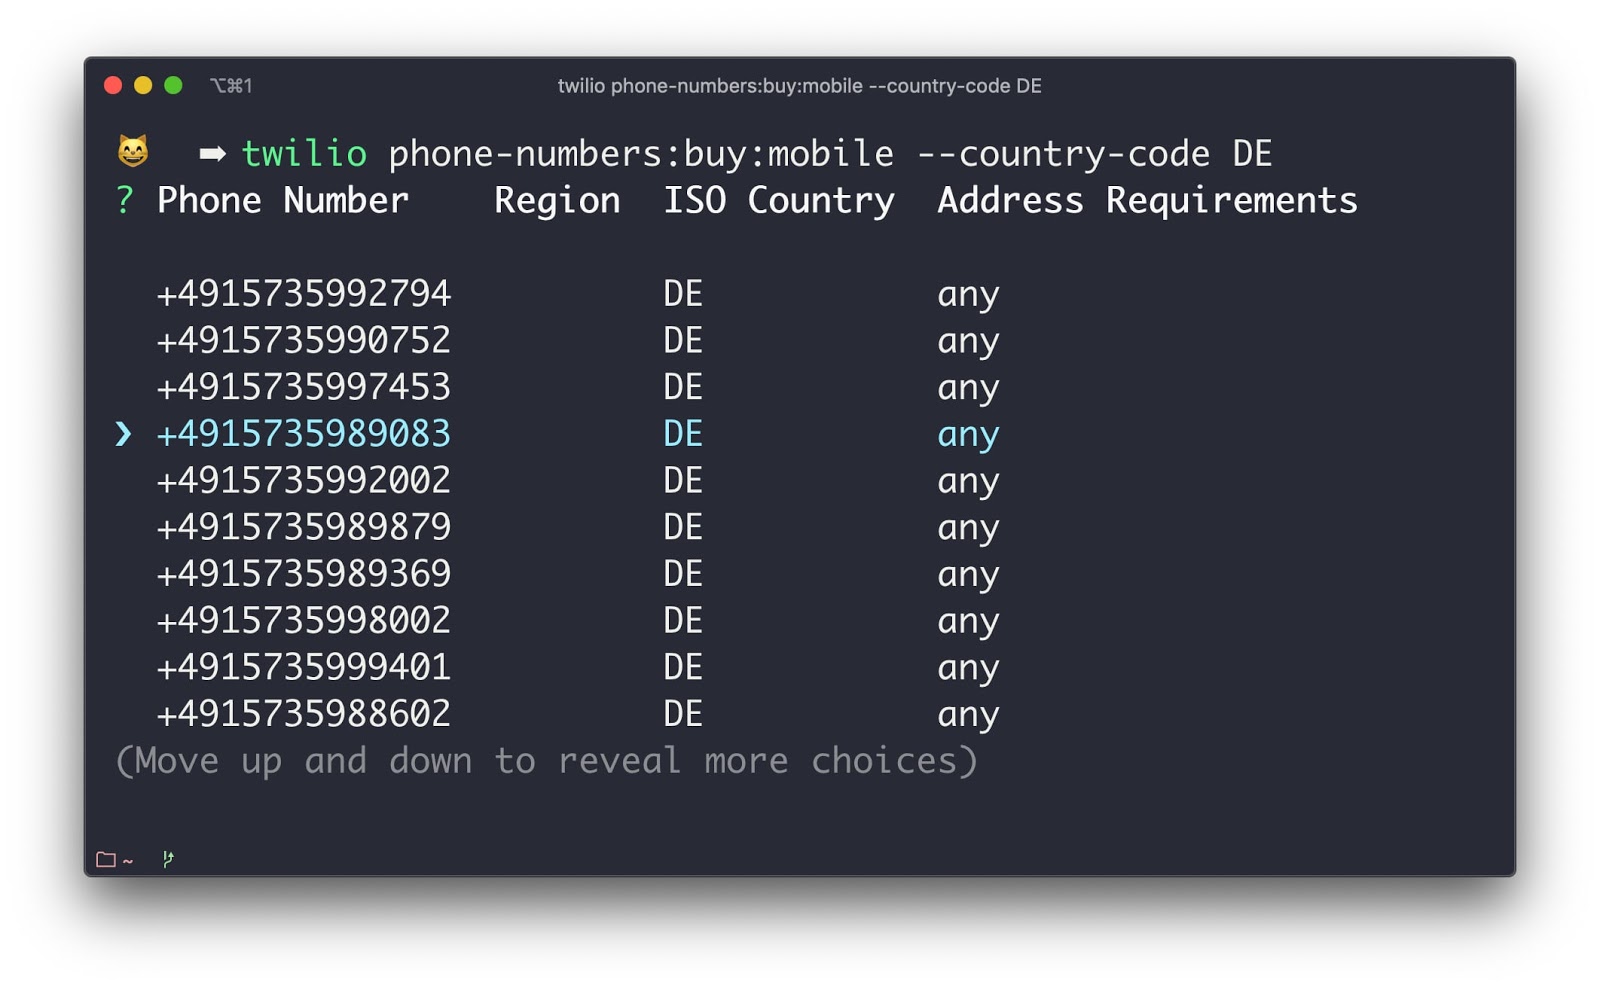 Command: `twilio phone-numbers:buy:mobile --country-code DE` showing available phone numbers